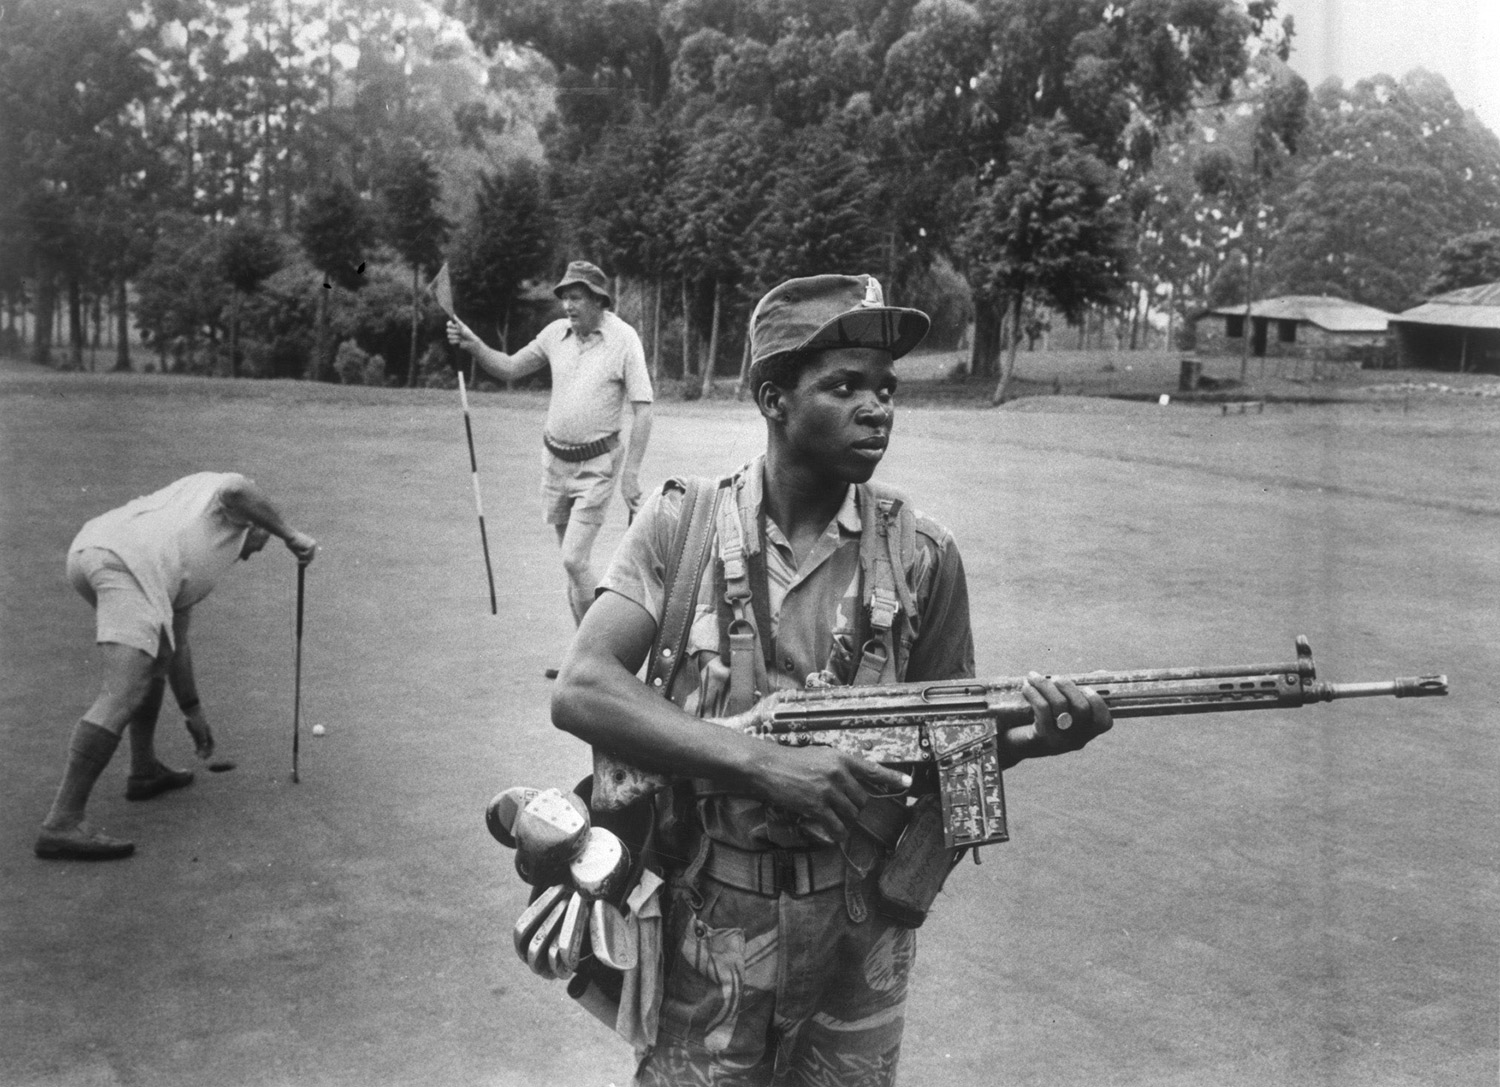 An armed guard provides security for white Rhodesian golfers at the Leopard Rock Hotel, Manicaland, 1978. Eddie Adams / Press Association Images